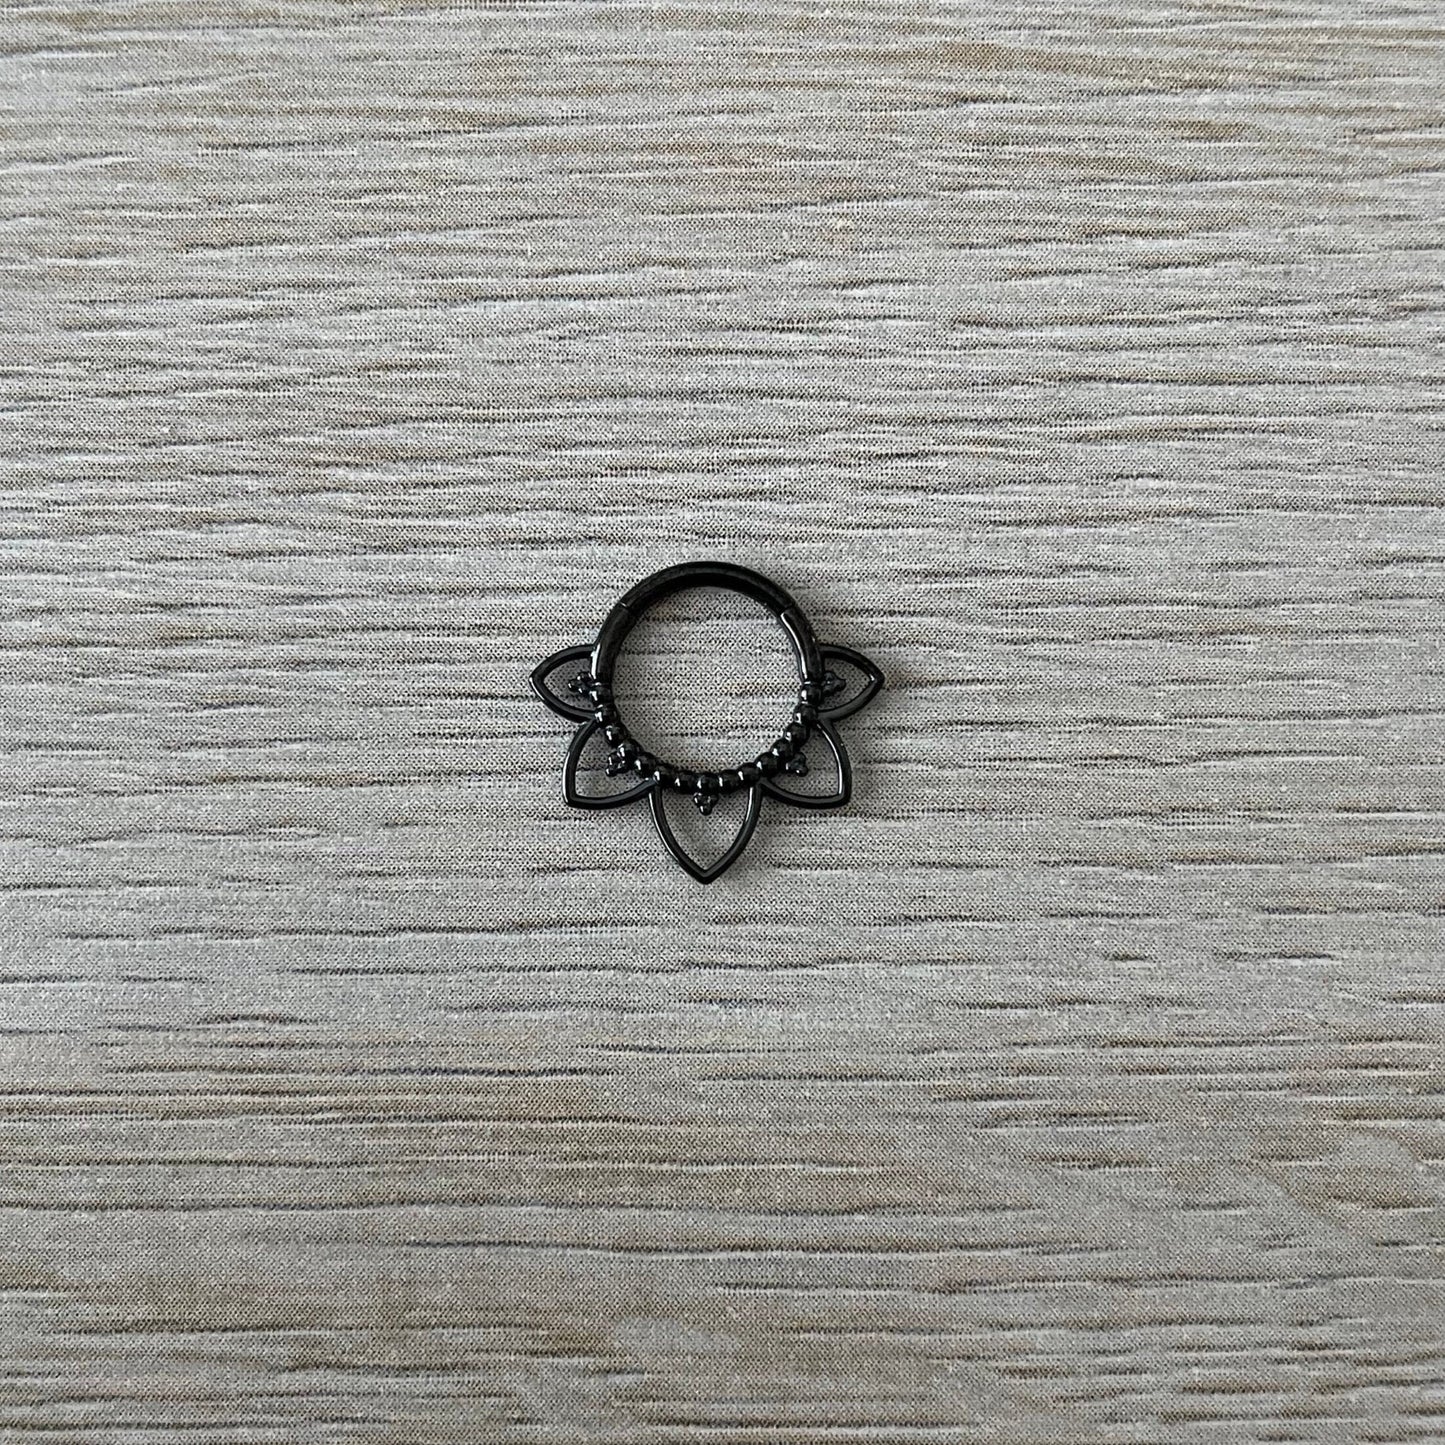 Black Daith Earring (16G | 8mm | Surgical Steel | Black, Rose Gold, Gold or Silver)